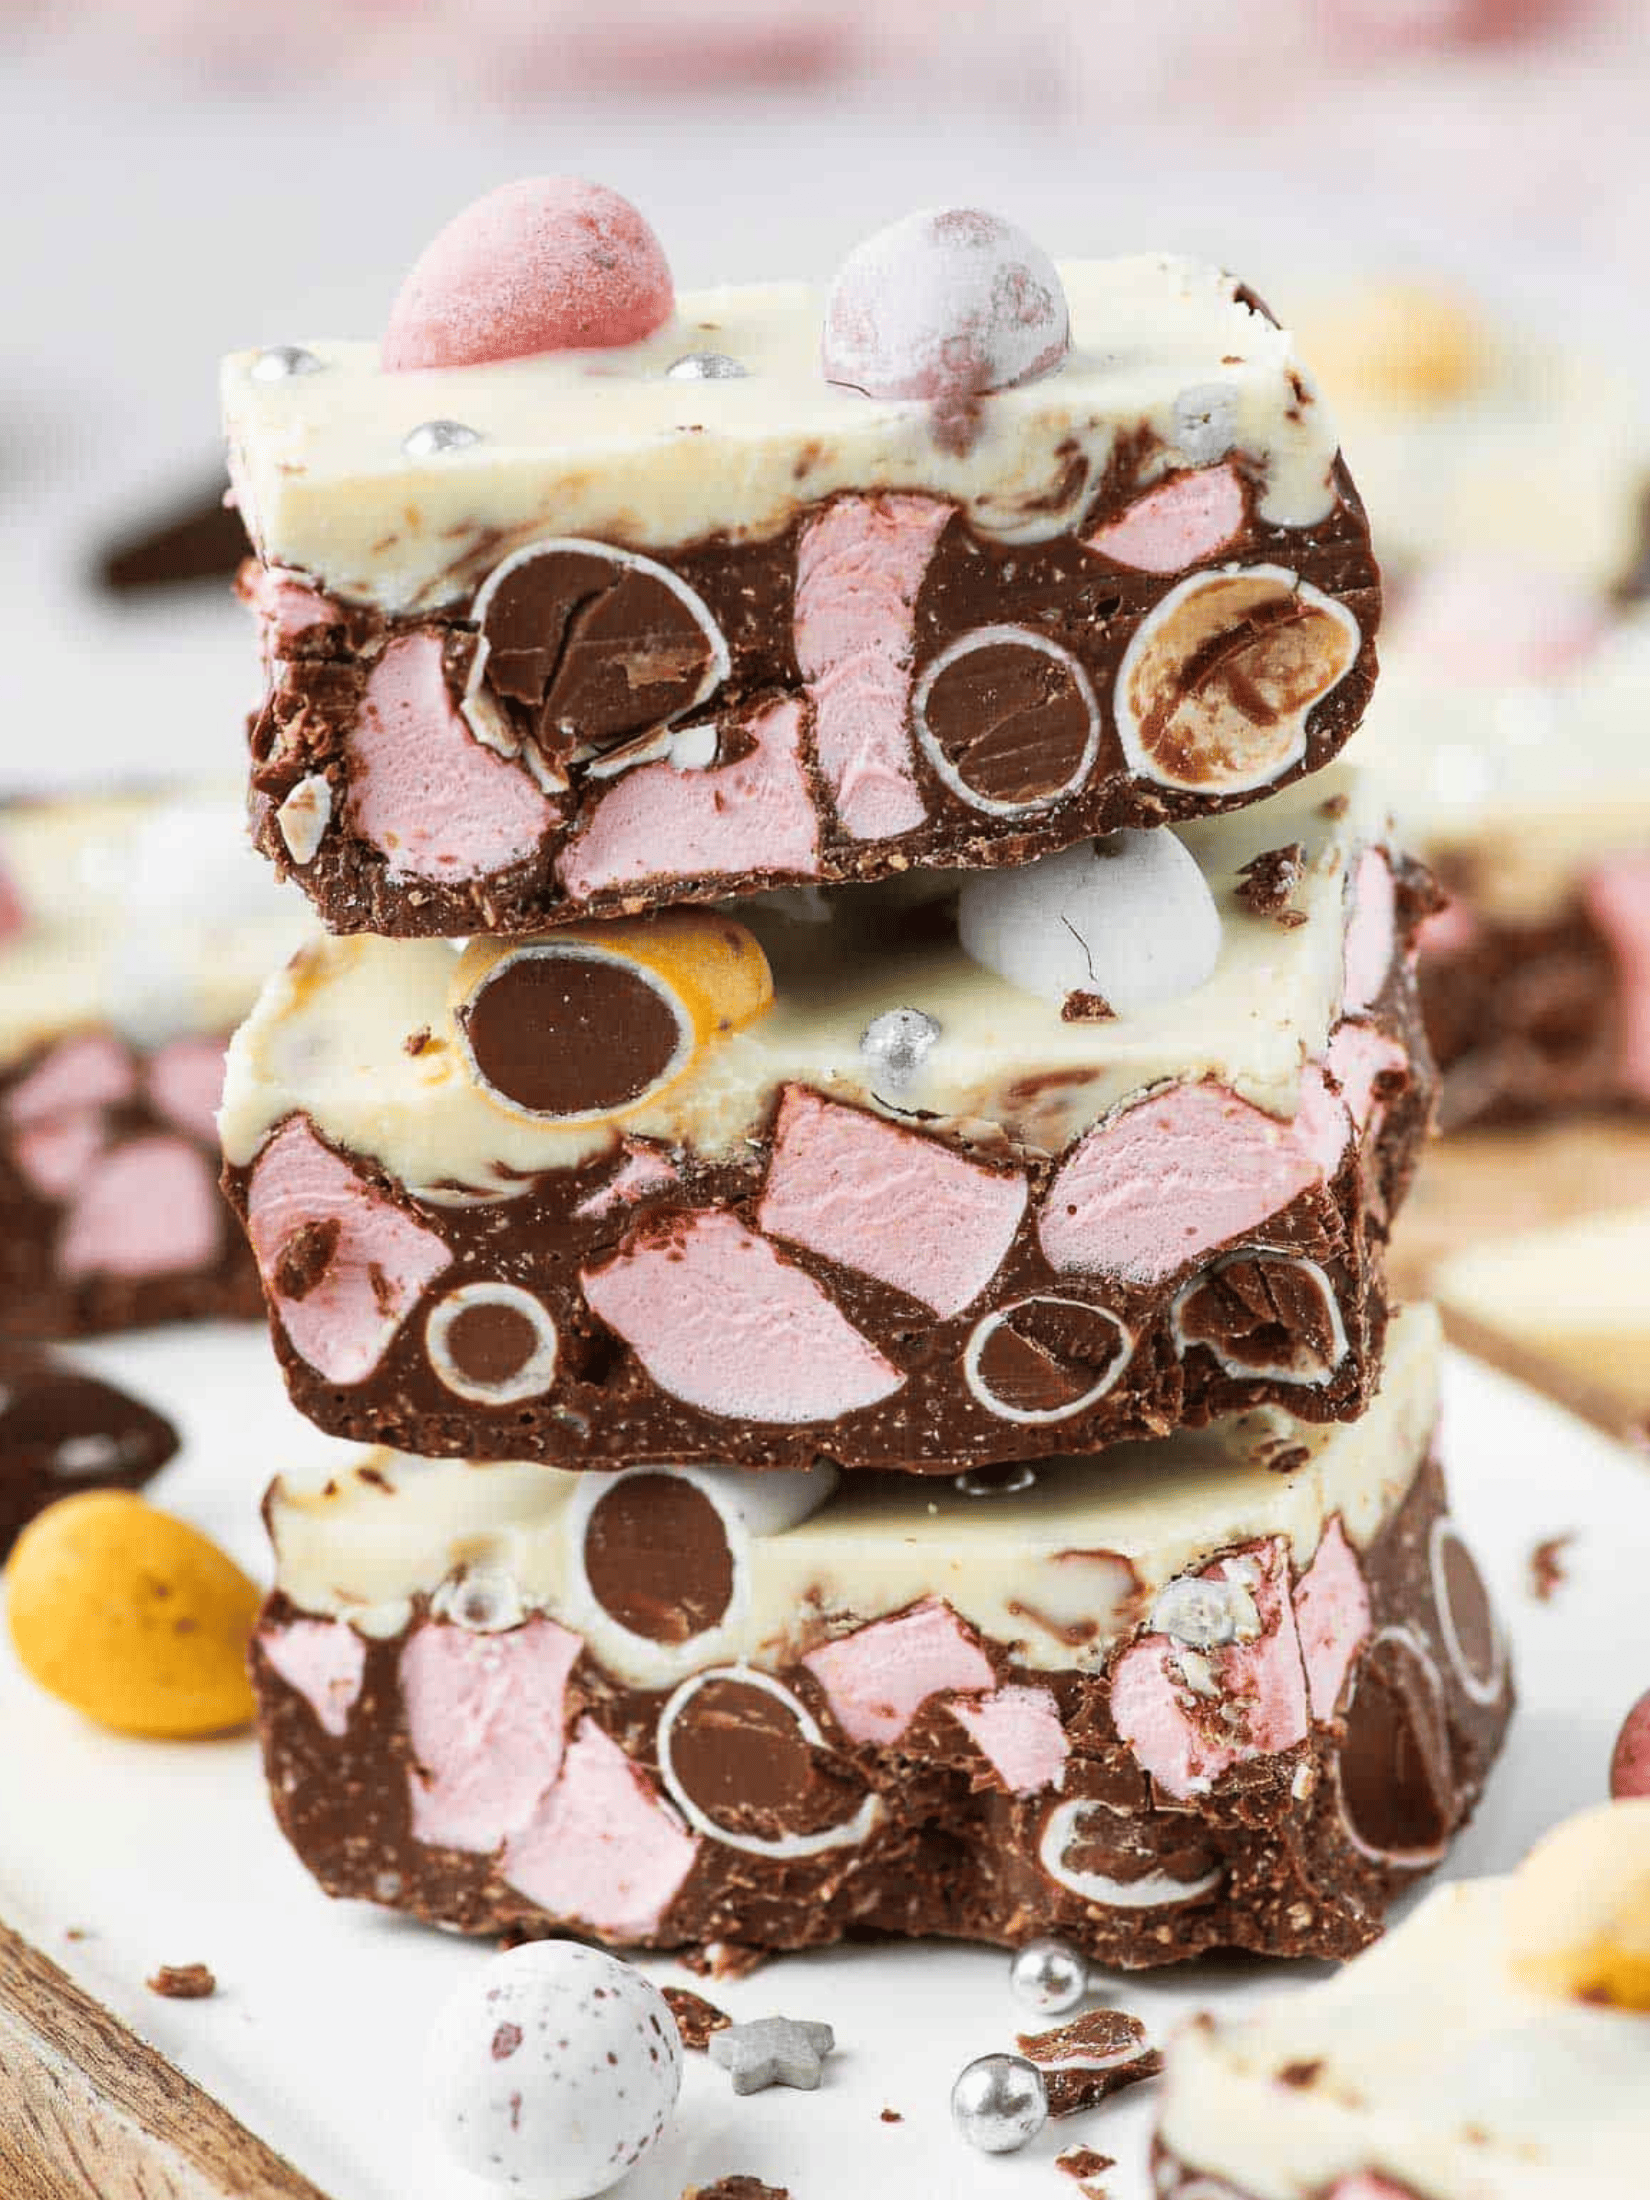 a delicious Easter rocky road slices with a colorful assortment of marshmallows, chocolate, and nuts.